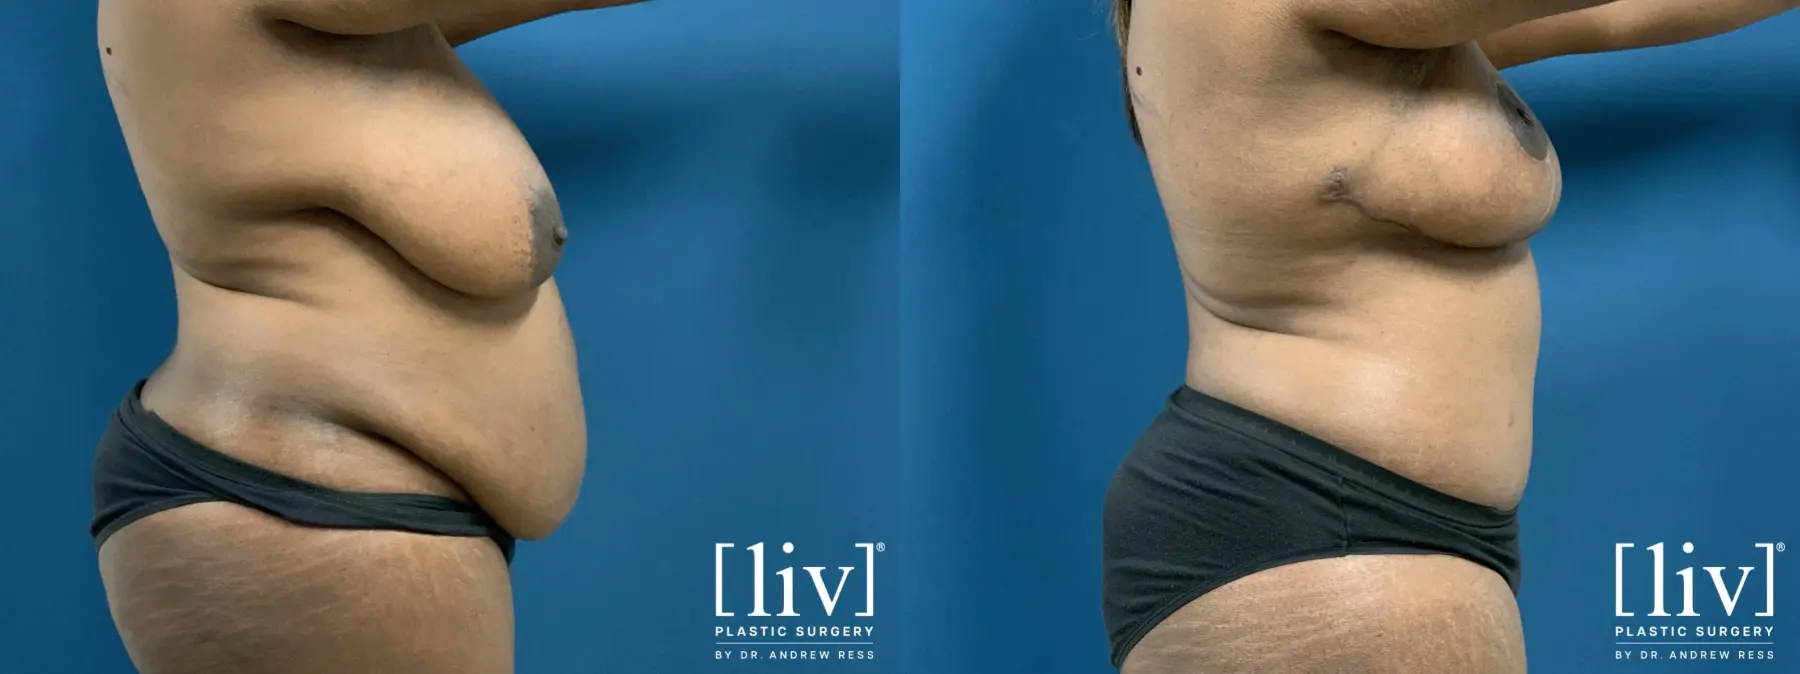 Lipoabdominoplasty - Before and After 5